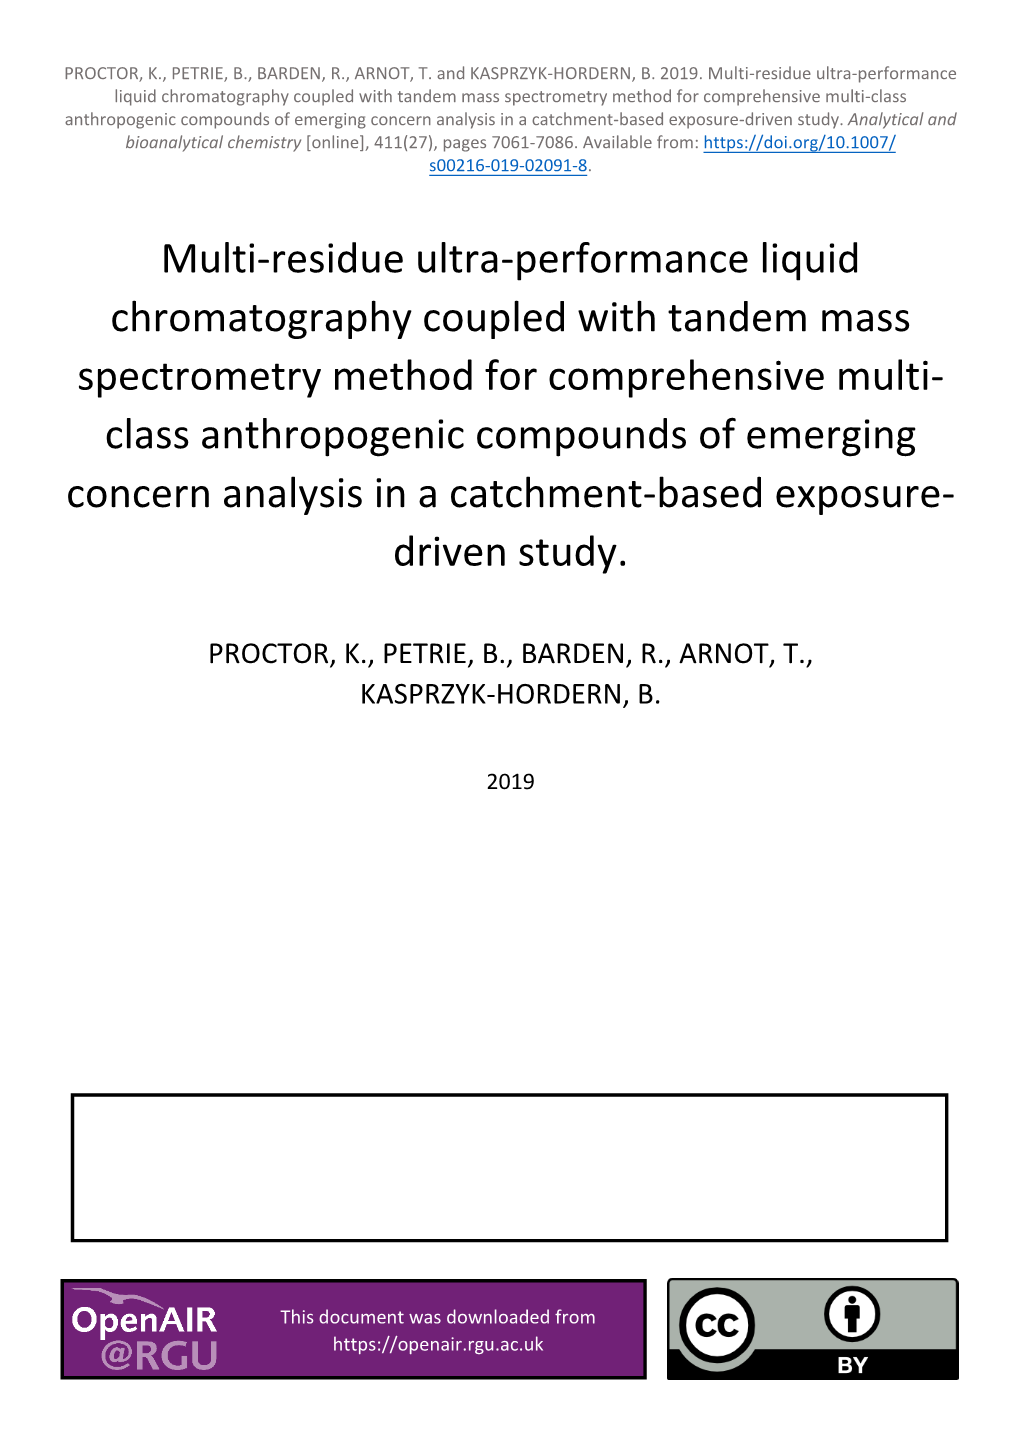 Multi-Residue Ultra-Performance Liquid Chromatography Coupled With